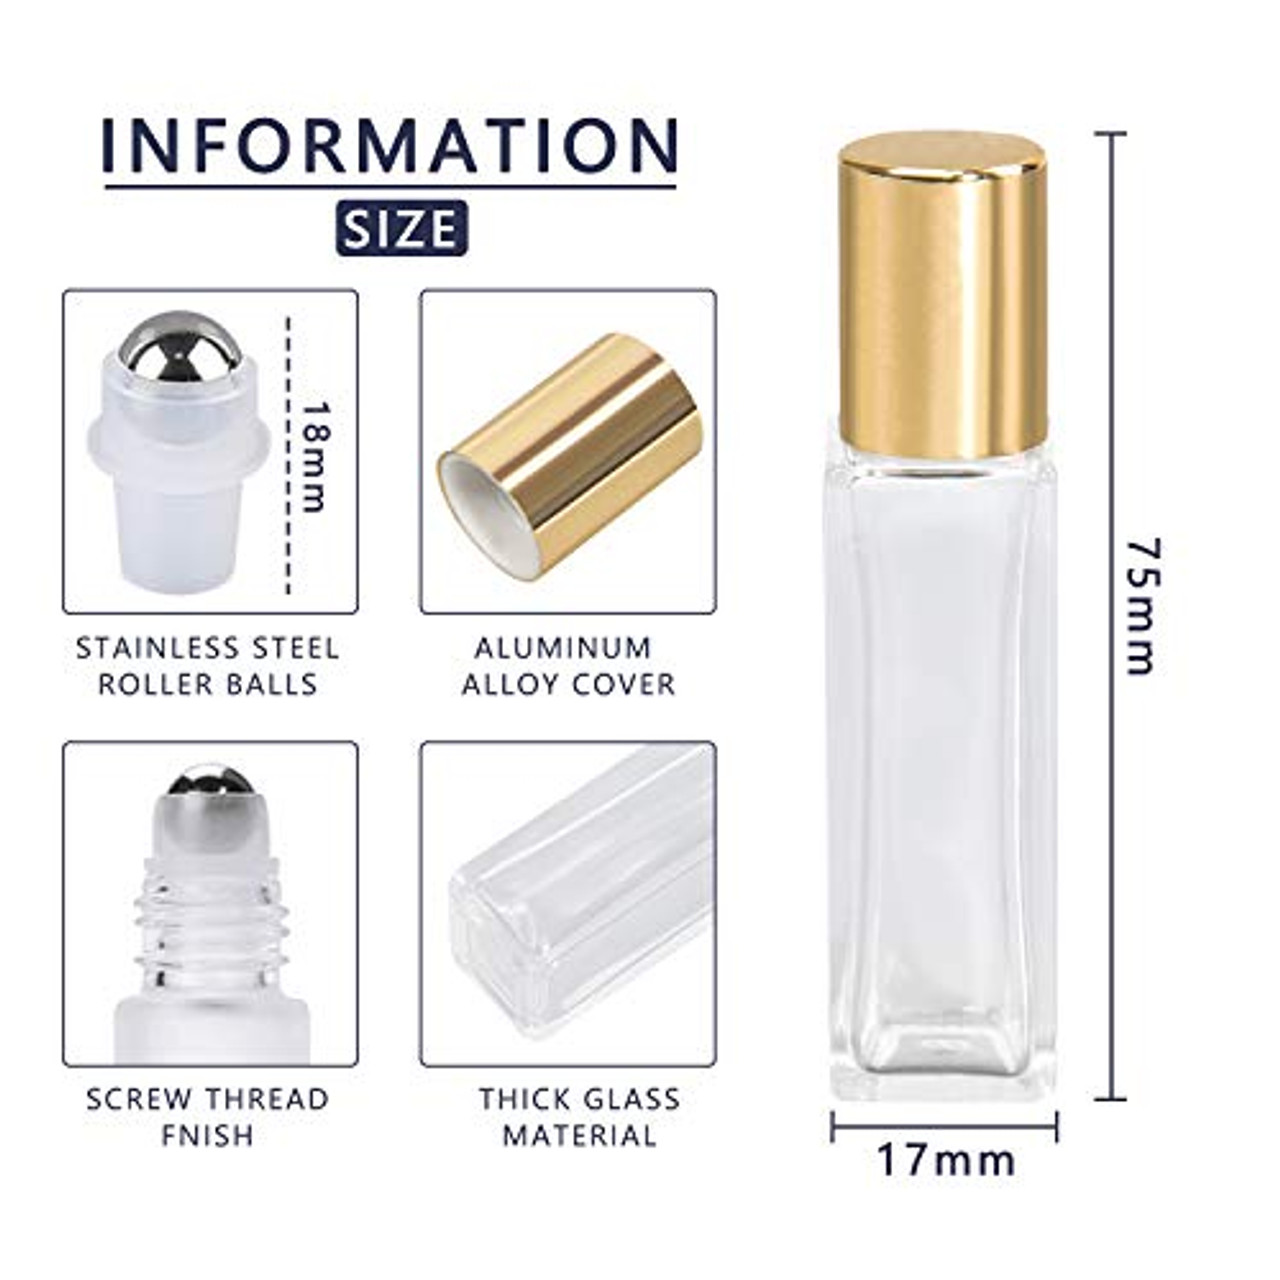 Chanel: No. 5 - Type Scented Body Oil Fragrance [Roll-On - Clear Glass -  Brown - 1/2 oz.]